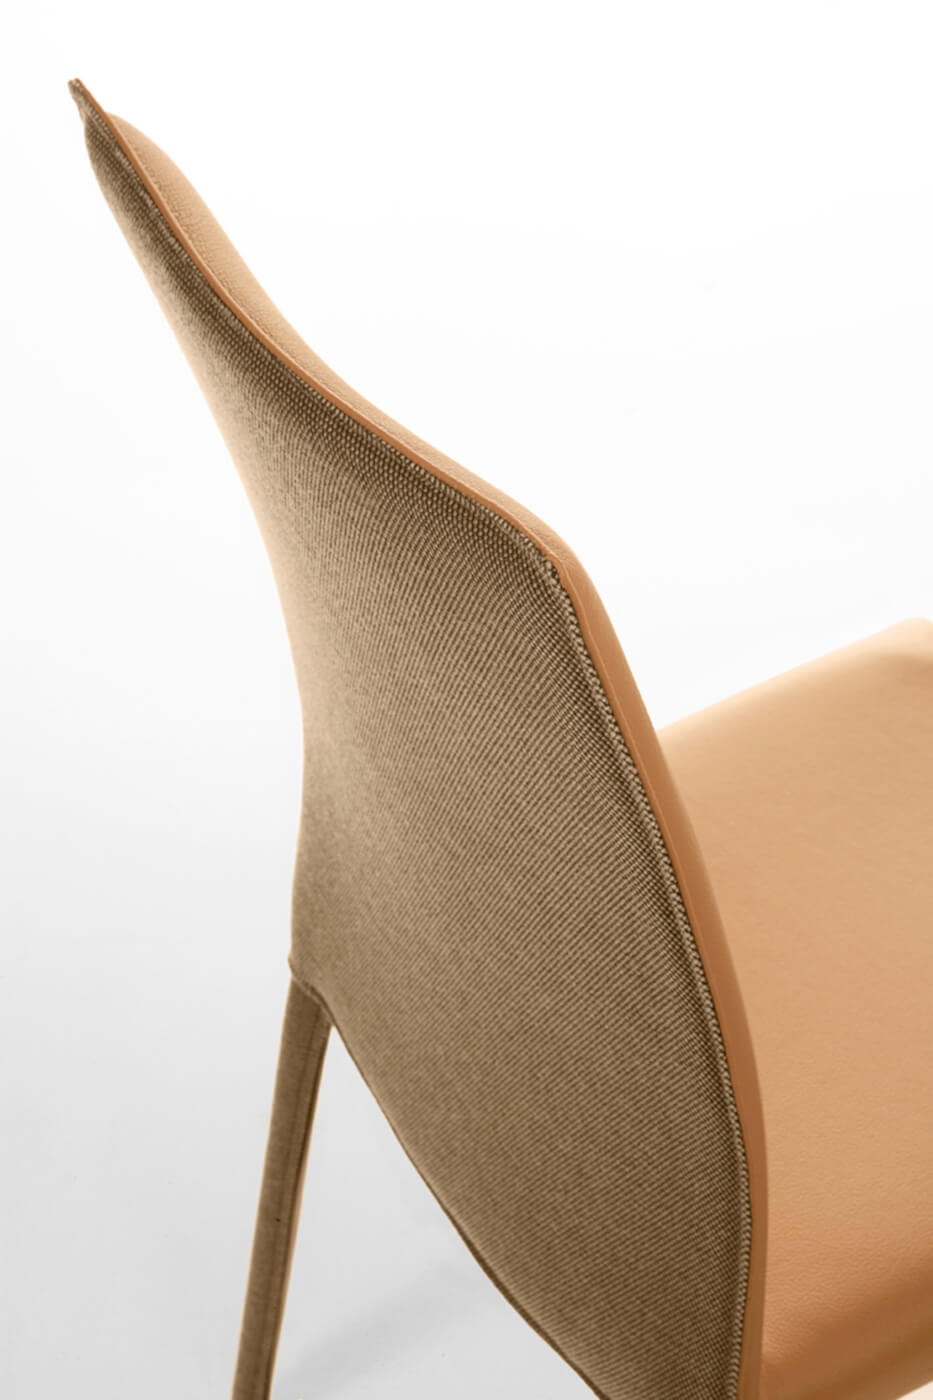 Nuvola chair detail with backrest in orange fabric